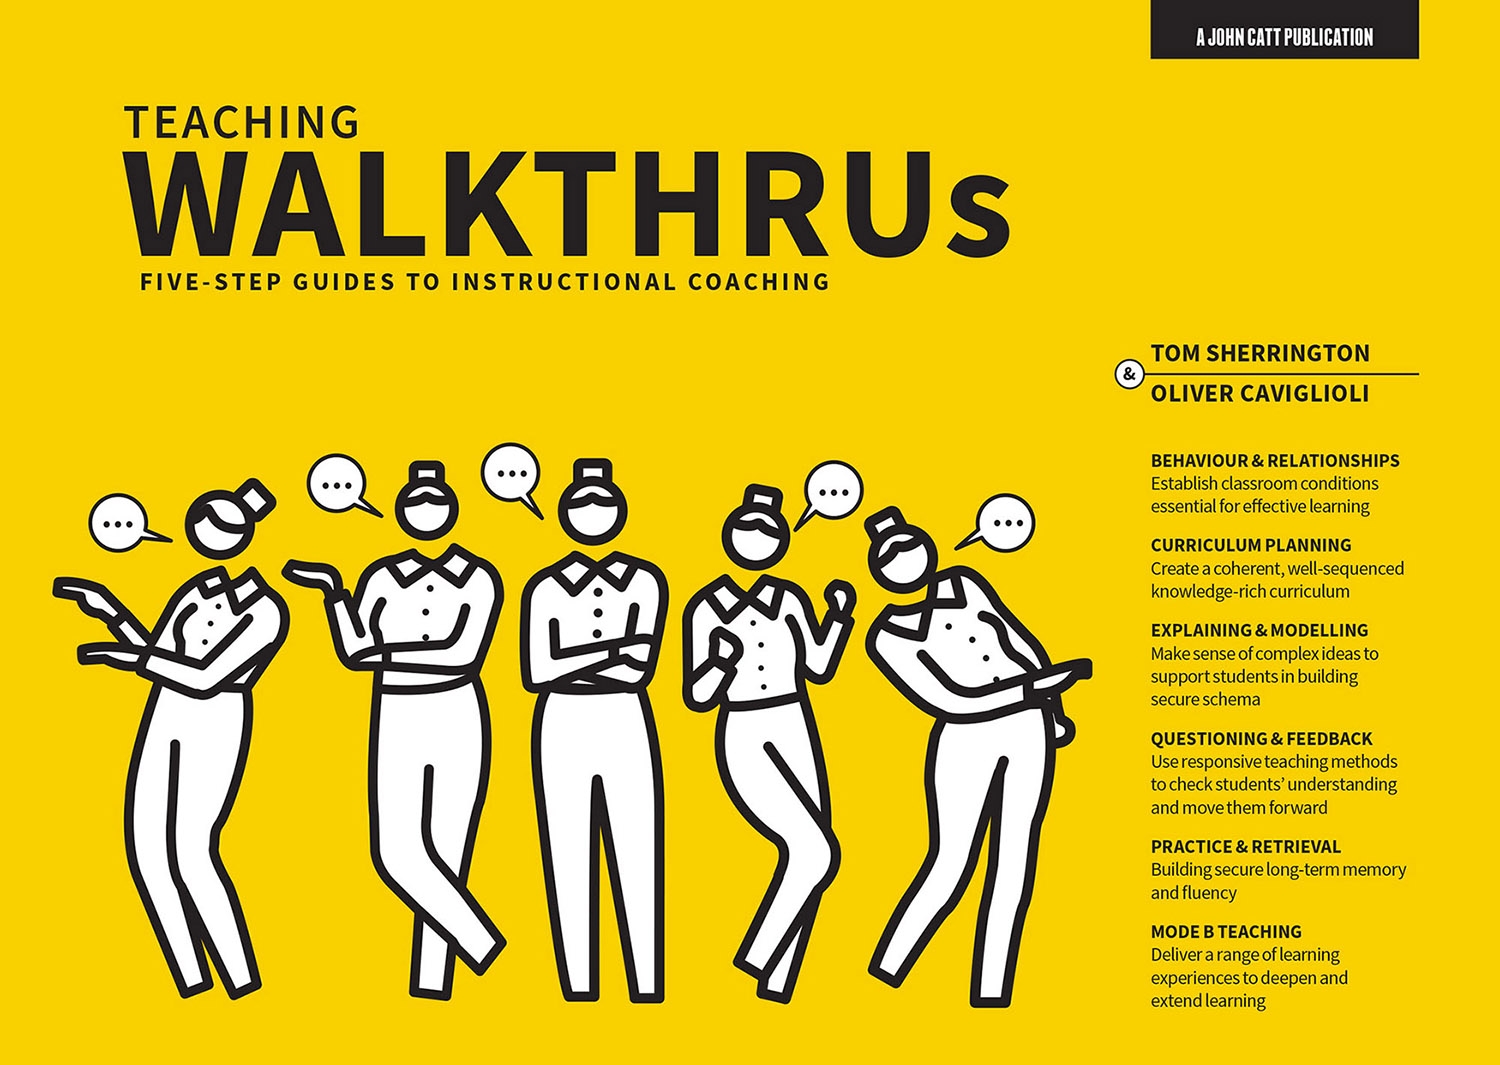 Featured image for “Teaching WalkThrus: Five-step guides to instructional coaching”